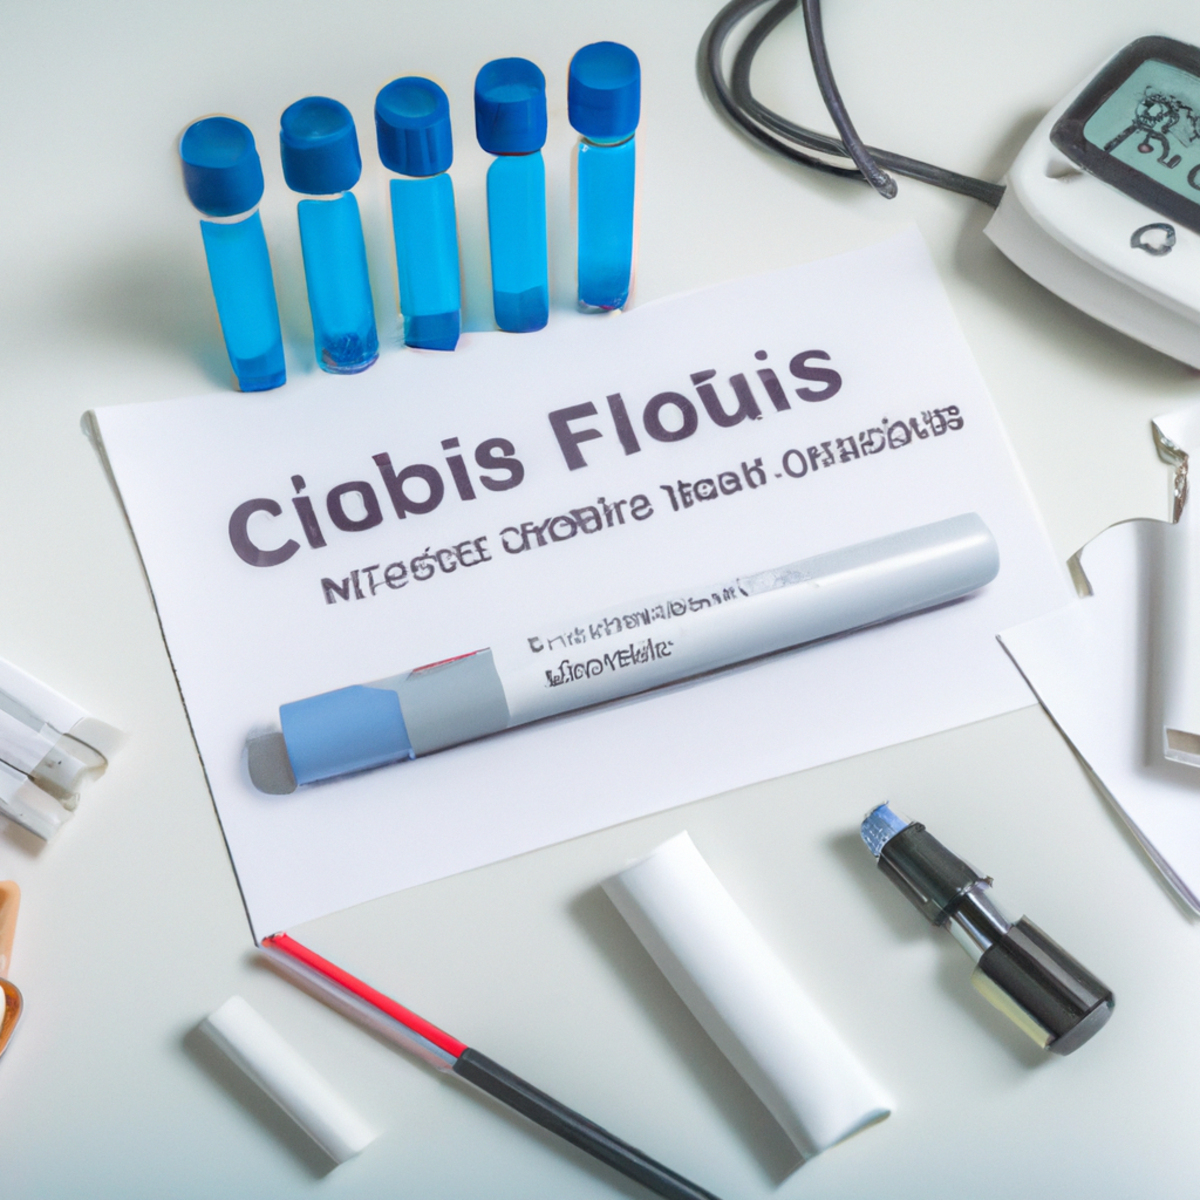 Clinical laboratory with diabetes-related equipment, highlighting the connection between cystic fibrosis and diabetes.